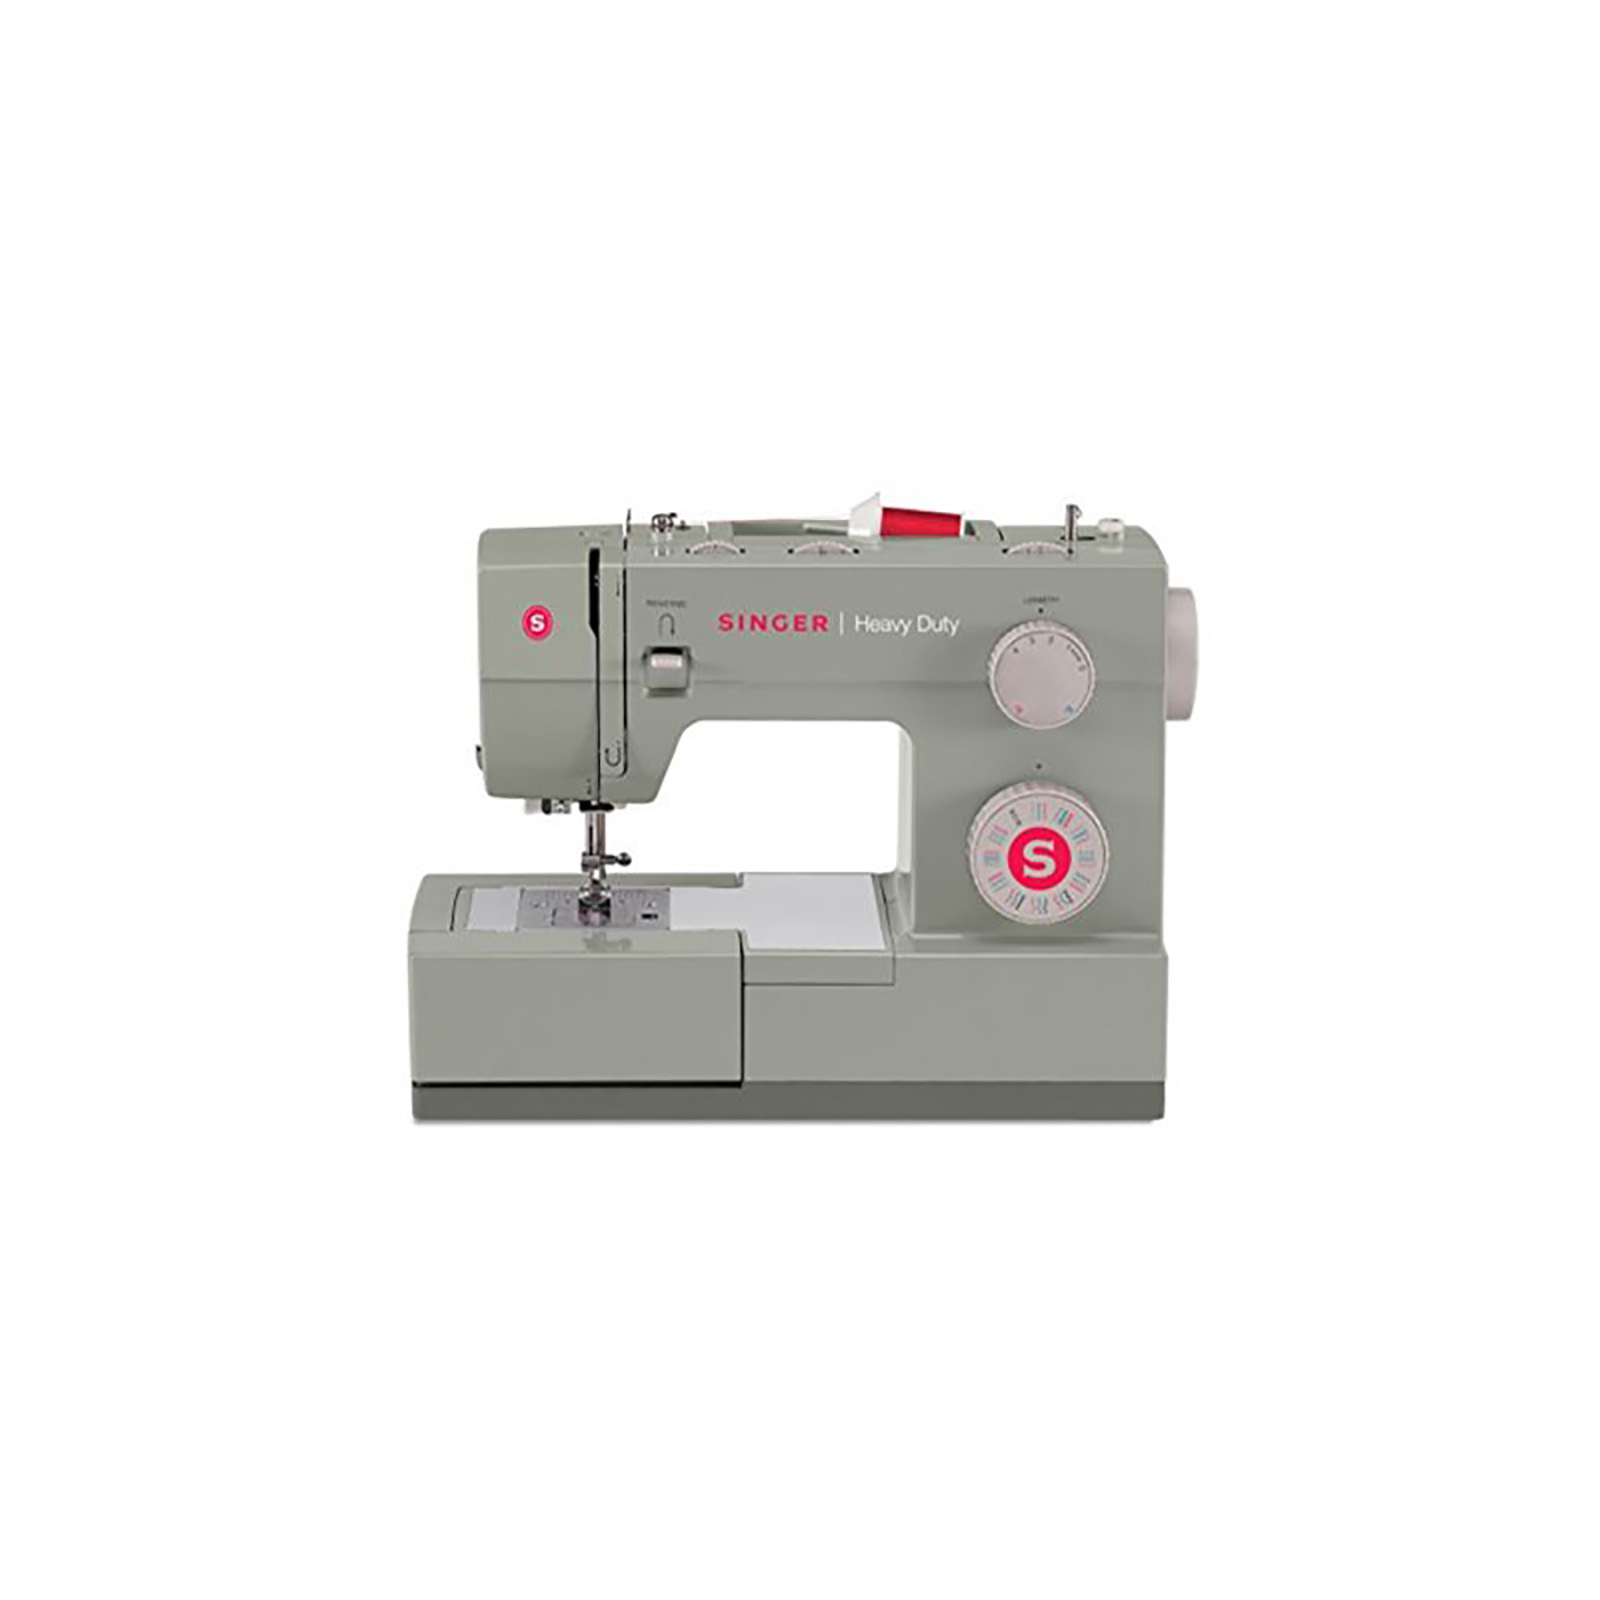 Singer Sewing 230072112 4452 Heavy Duty Sewing Machine - Gray